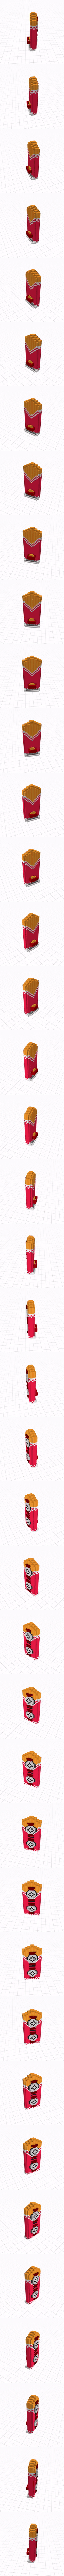 Hoverboard French Fry